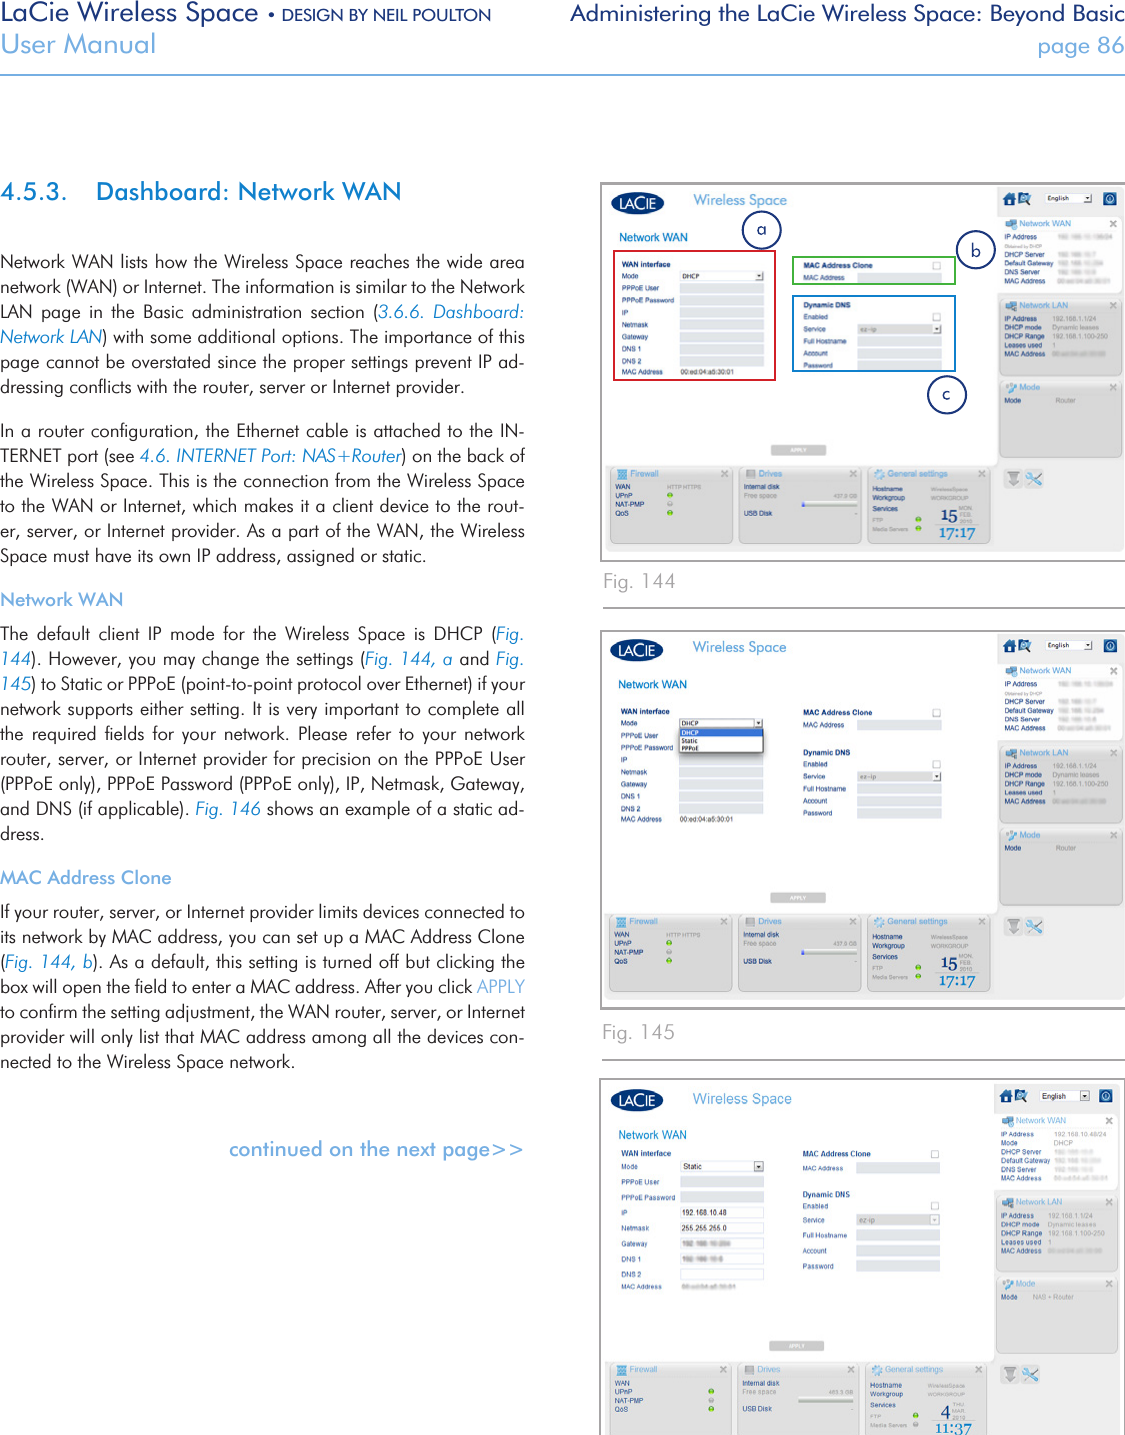 LaCie Wireless Space • DESIGN BY NEIL POULTON Administering the LaCie Wireless Space: Beyond BasicUser Manual  page 864.5.3.  Dashboard: Network WANNetwork WAN lists how the Wireless Space reaches the wide area network (WAN) or Internet. The information is similar to the Network LAN  page  in  the  Basic  administration  section  (3.6.6.  Dashboard: Network LAN) with some additional options. The importance of this page cannot be overstated since the proper settings prevent IP ad-dressing conﬂicts with the router, server or Internet provider. In a router conﬁguration, the Ethernet cable is attached to the IN-TERNET port (see 4.6. INTERNET Port: NAS+Router) on the back of the Wireless Space. This is the connection from the Wireless Space to the WAN or Internet, which makes it a client device to the rout-er, server, or Internet provider. As a part of the WAN, the Wireless Space must have its own IP address, assigned or static.Network WANThe  default  client  IP  mode  for  the  Wireless  Space  is  DHCP  (Fig. 144). However, you may change the settings (Fig. 144, a and Fig. 145) to Static or PPPoE (point-to-point protocol over Ethernet) if your network supports either setting. It is very important to complete all the  required  ﬁelds  for  your  network.  Please  refer  to  your  network router, server, or Internet provider for precision on the PPPoE User (PPPoE only), PPPoE Password (PPPoE only), IP, Netmask, Gateway, and DNS (if applicable). Fig. 146 shows an example of a static ad-dress.MAC Address CloneIf your router, server, or Internet provider limits devices connected to its network by MAC address, you can set up a MAC Address Clone (Fig. 144, b). As a default, this setting is turned off but clicking the box will open the ﬁeld to enter a MAC address. After you click APPLY to conﬁrm the setting adjustment, the WAN router, server, or Internet provider will only list that MAC address among all the devices con-nected to the Wireless Space network. continued on the next page&gt;&gt;Fig. 144Fig. 145Fig. 146